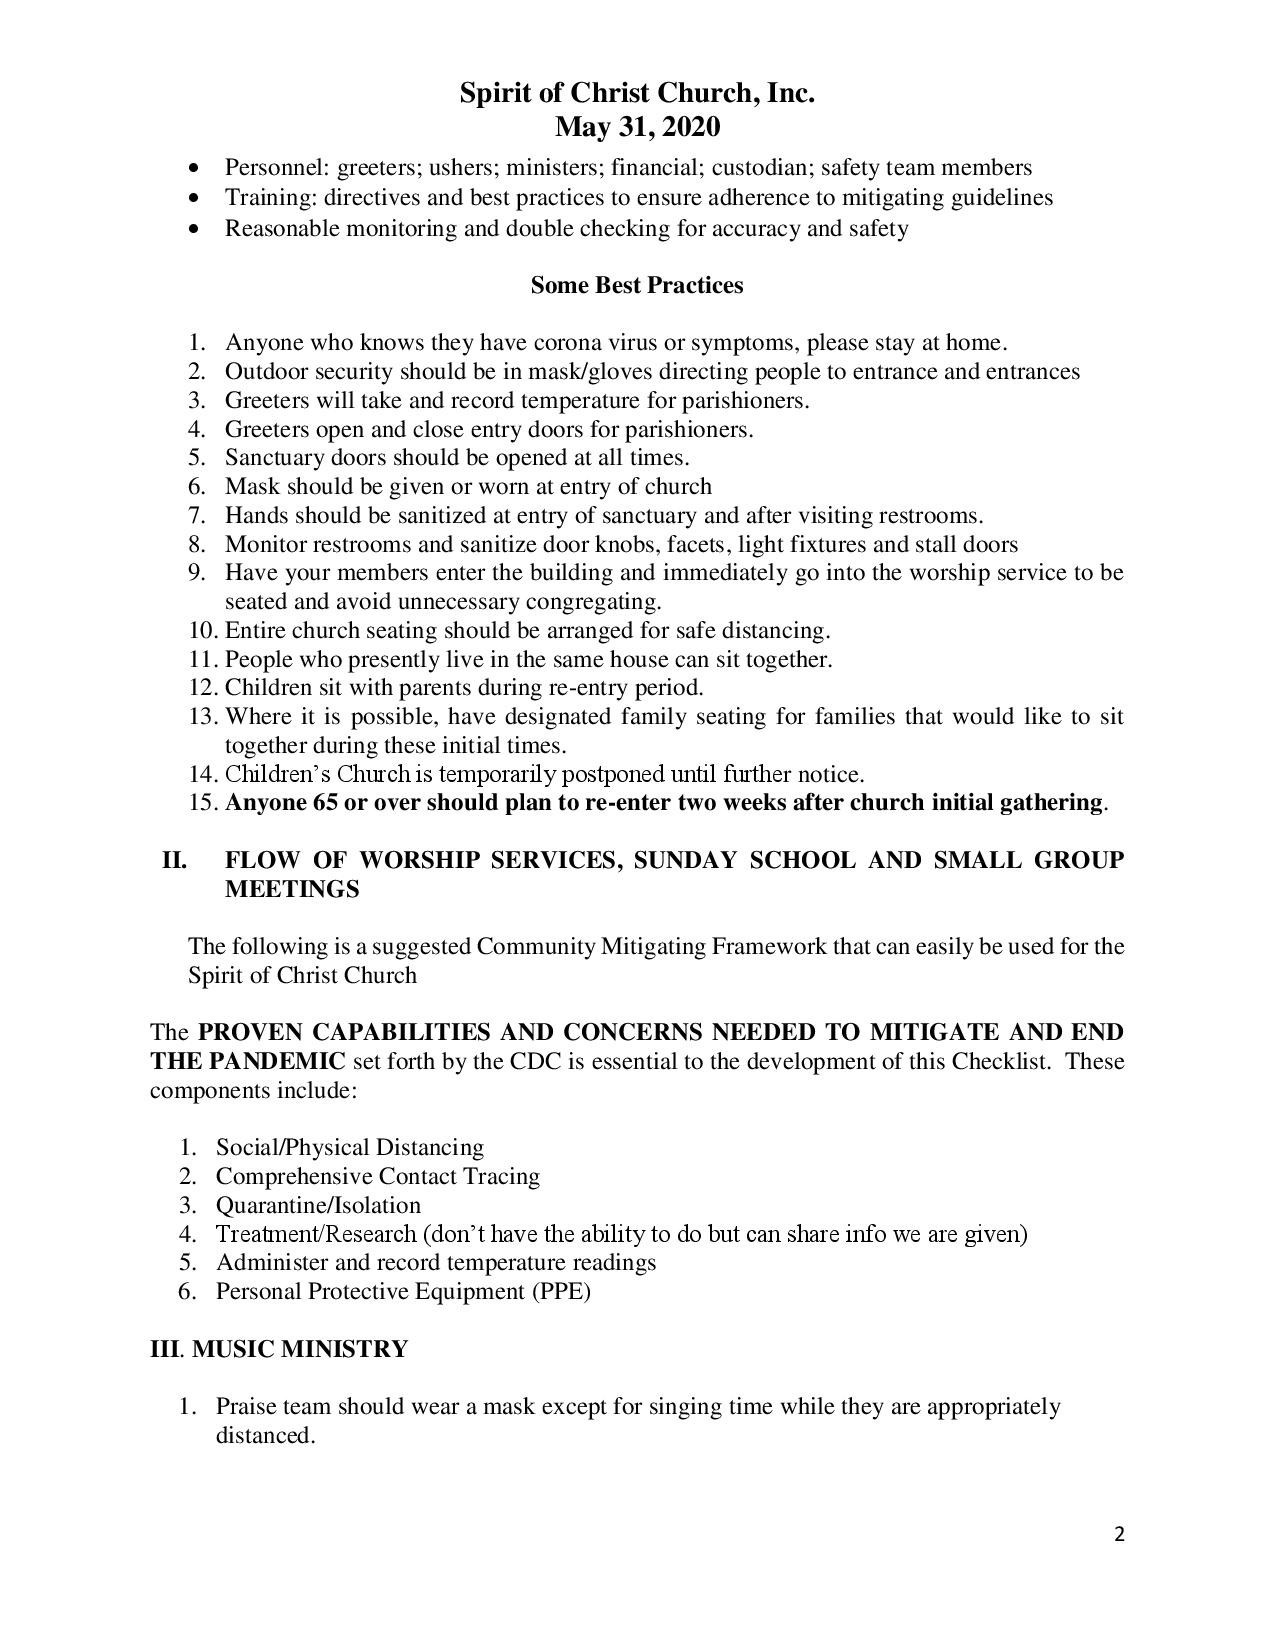 COVID-19_SAFELY REOPENING HOUSES OF WORSHIP GUIDELINE AND SUMMARY-page-002